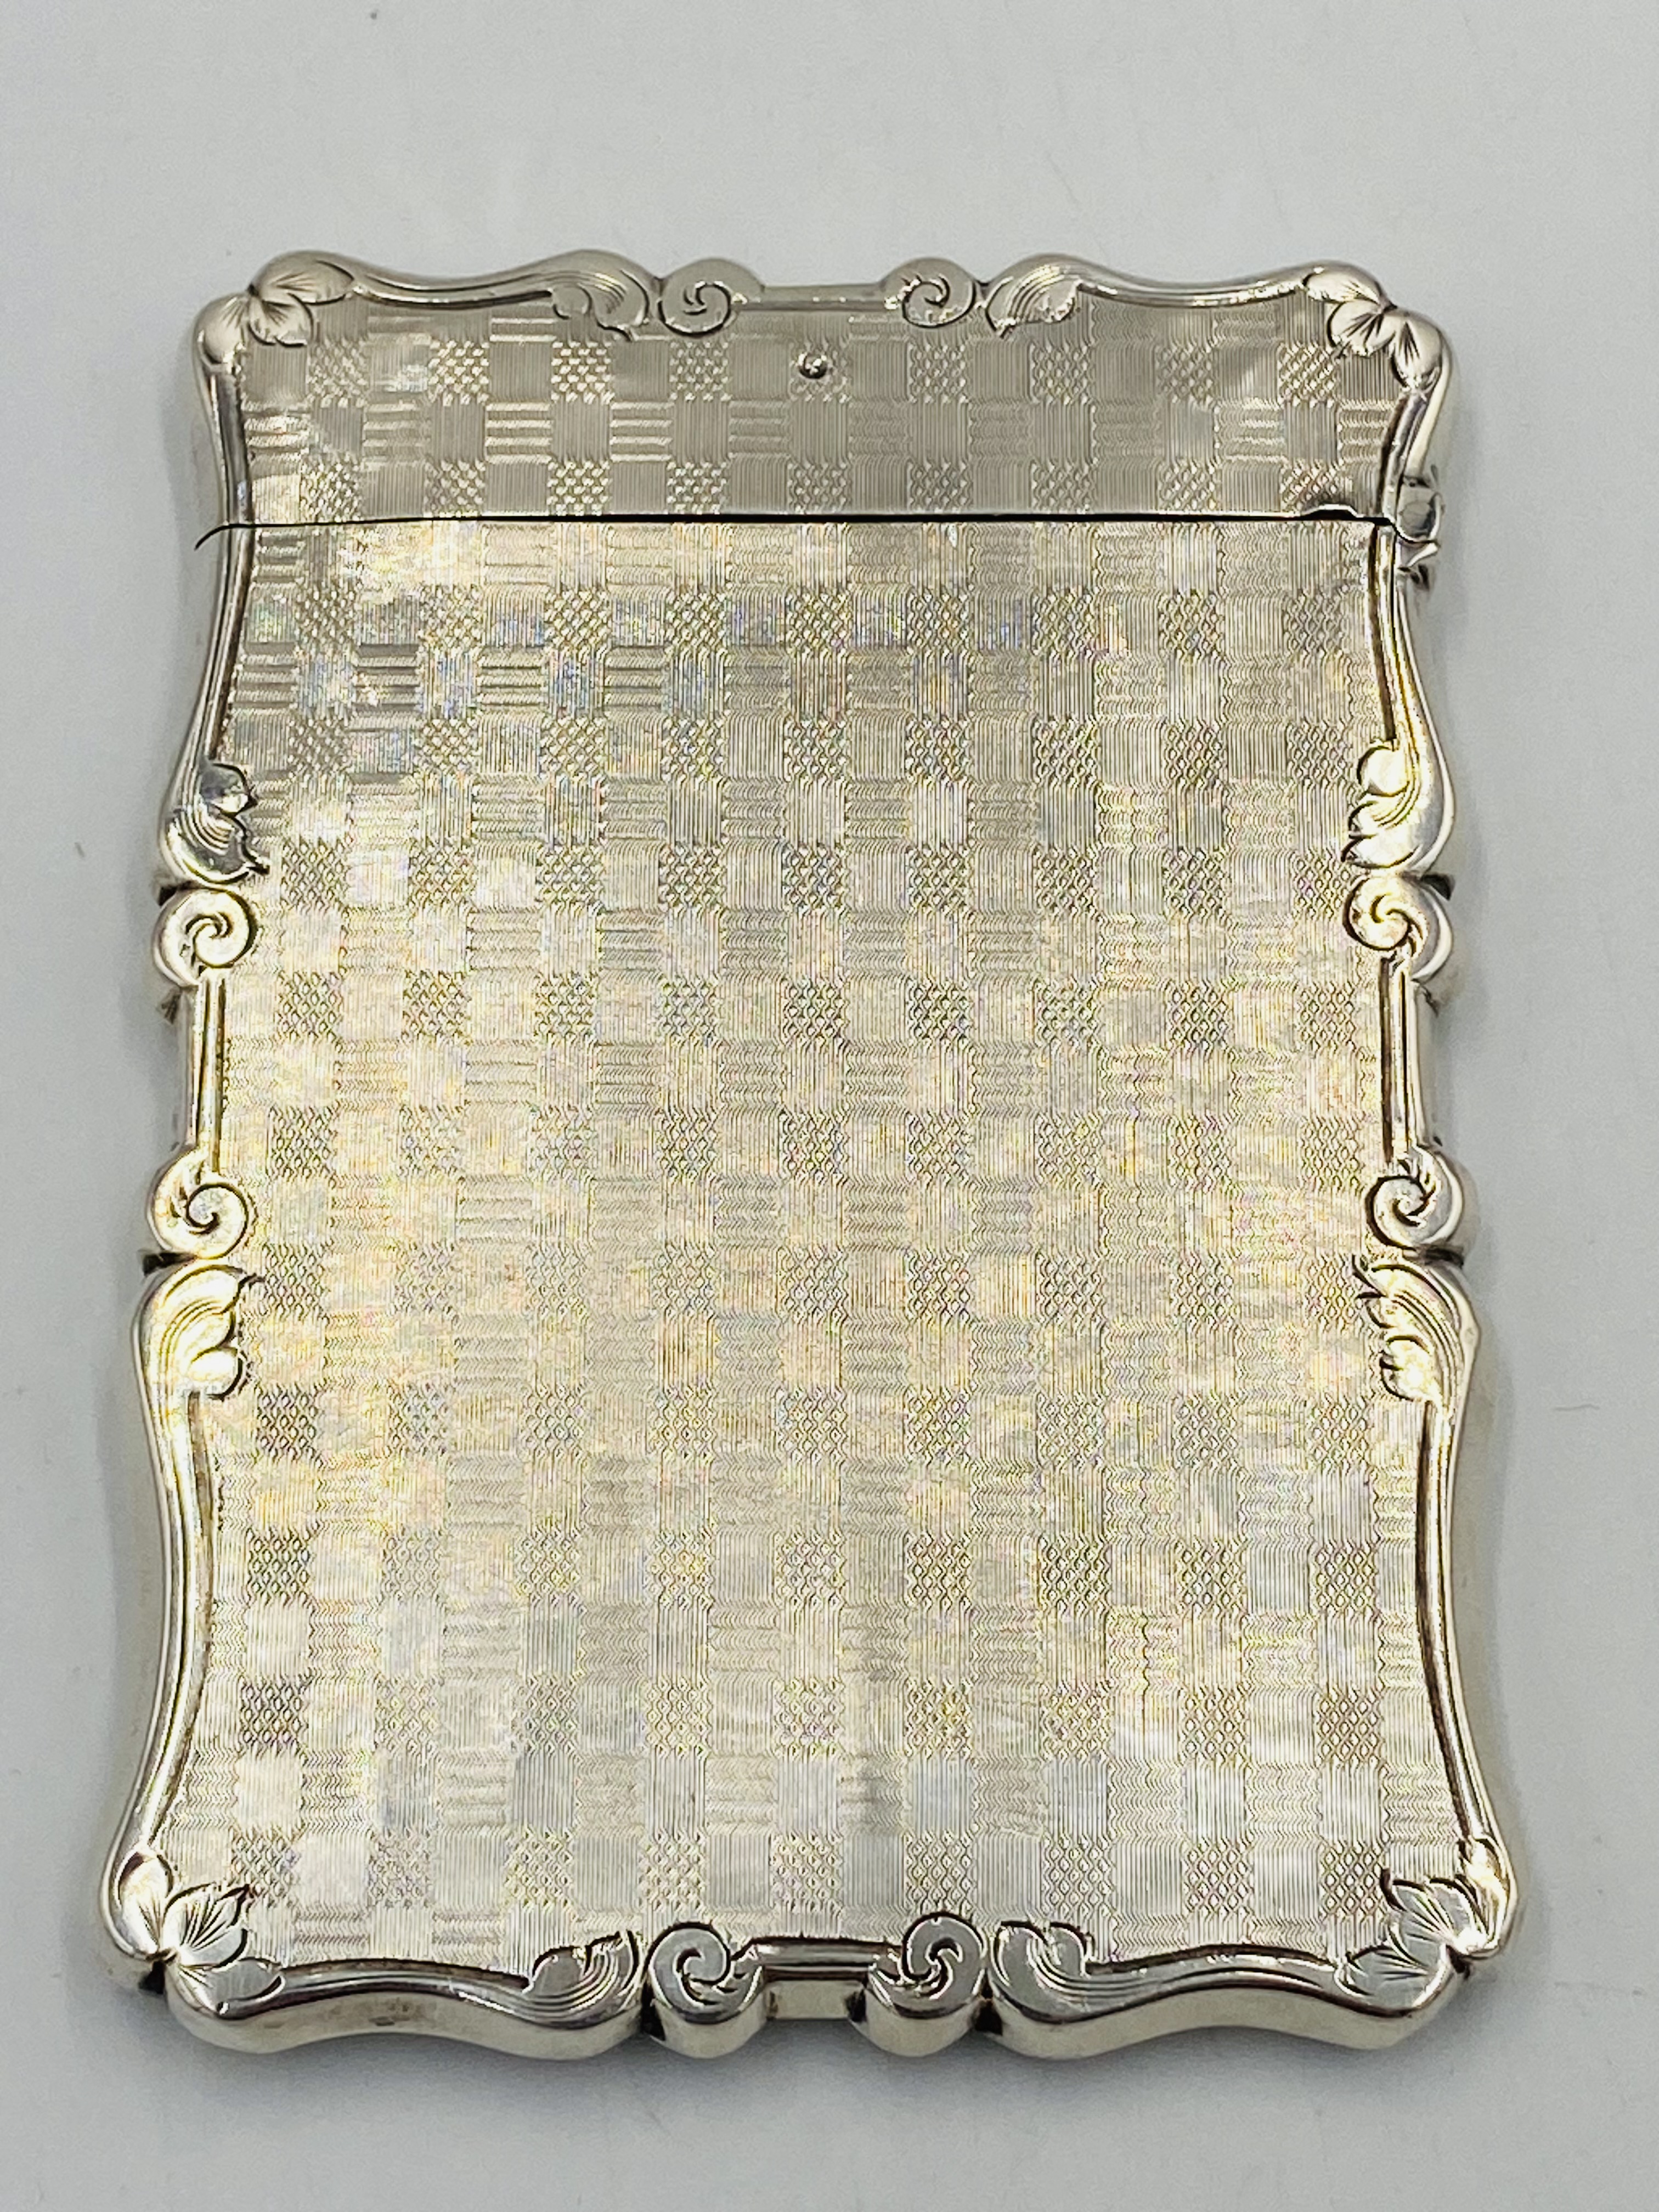 Silver card case - Image 2 of 3